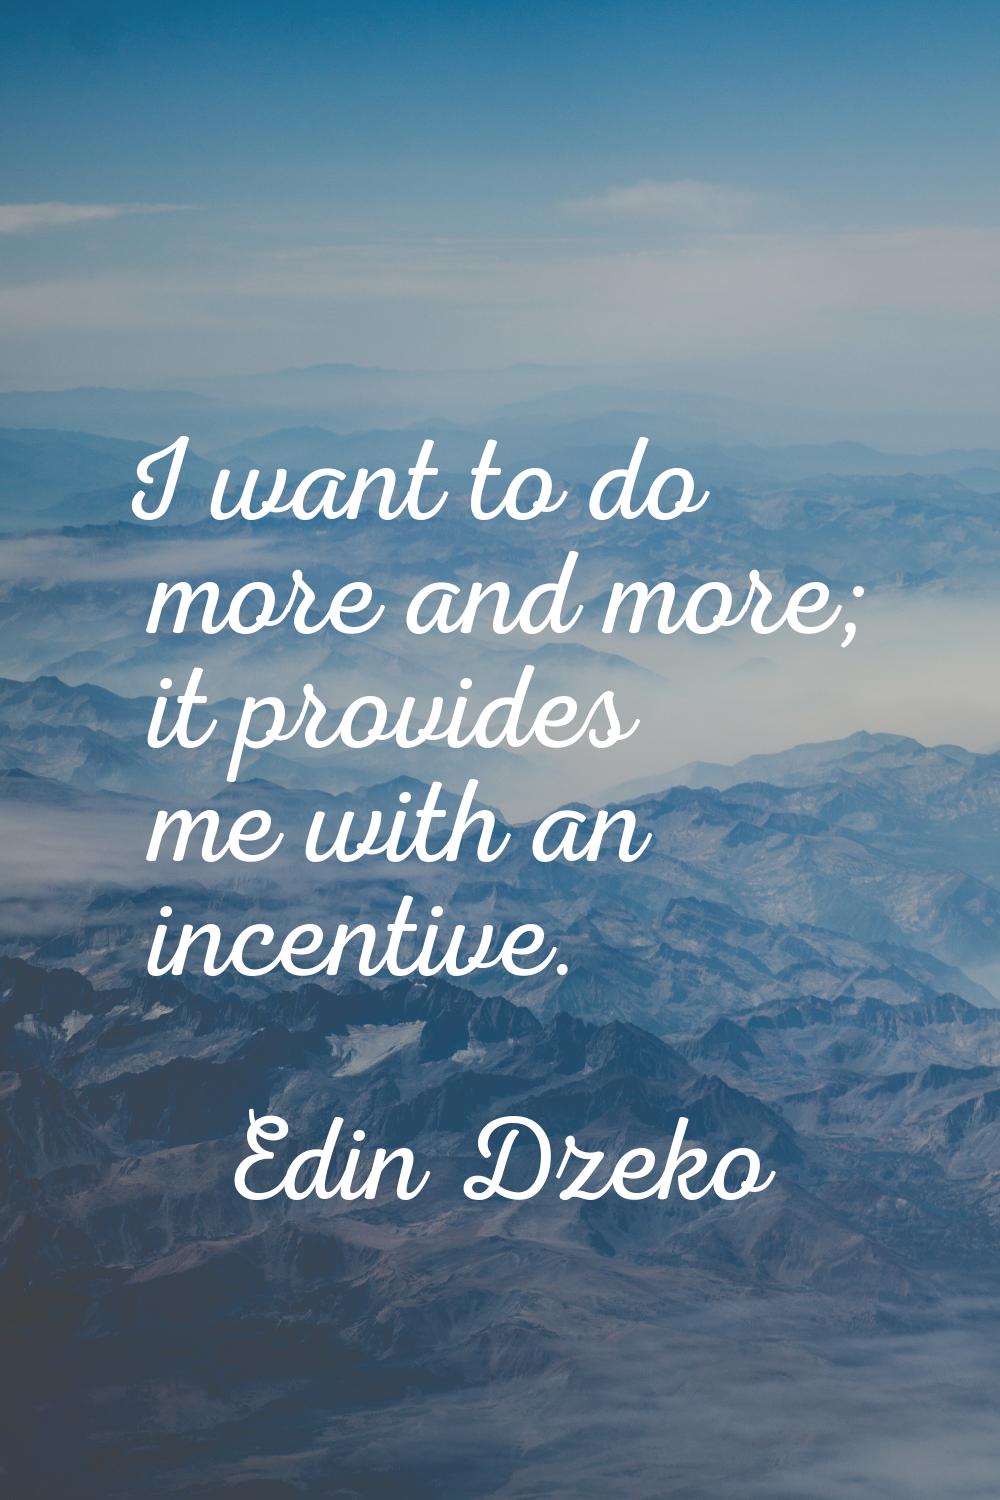 I want to do more and more; it provides me with an incentive.